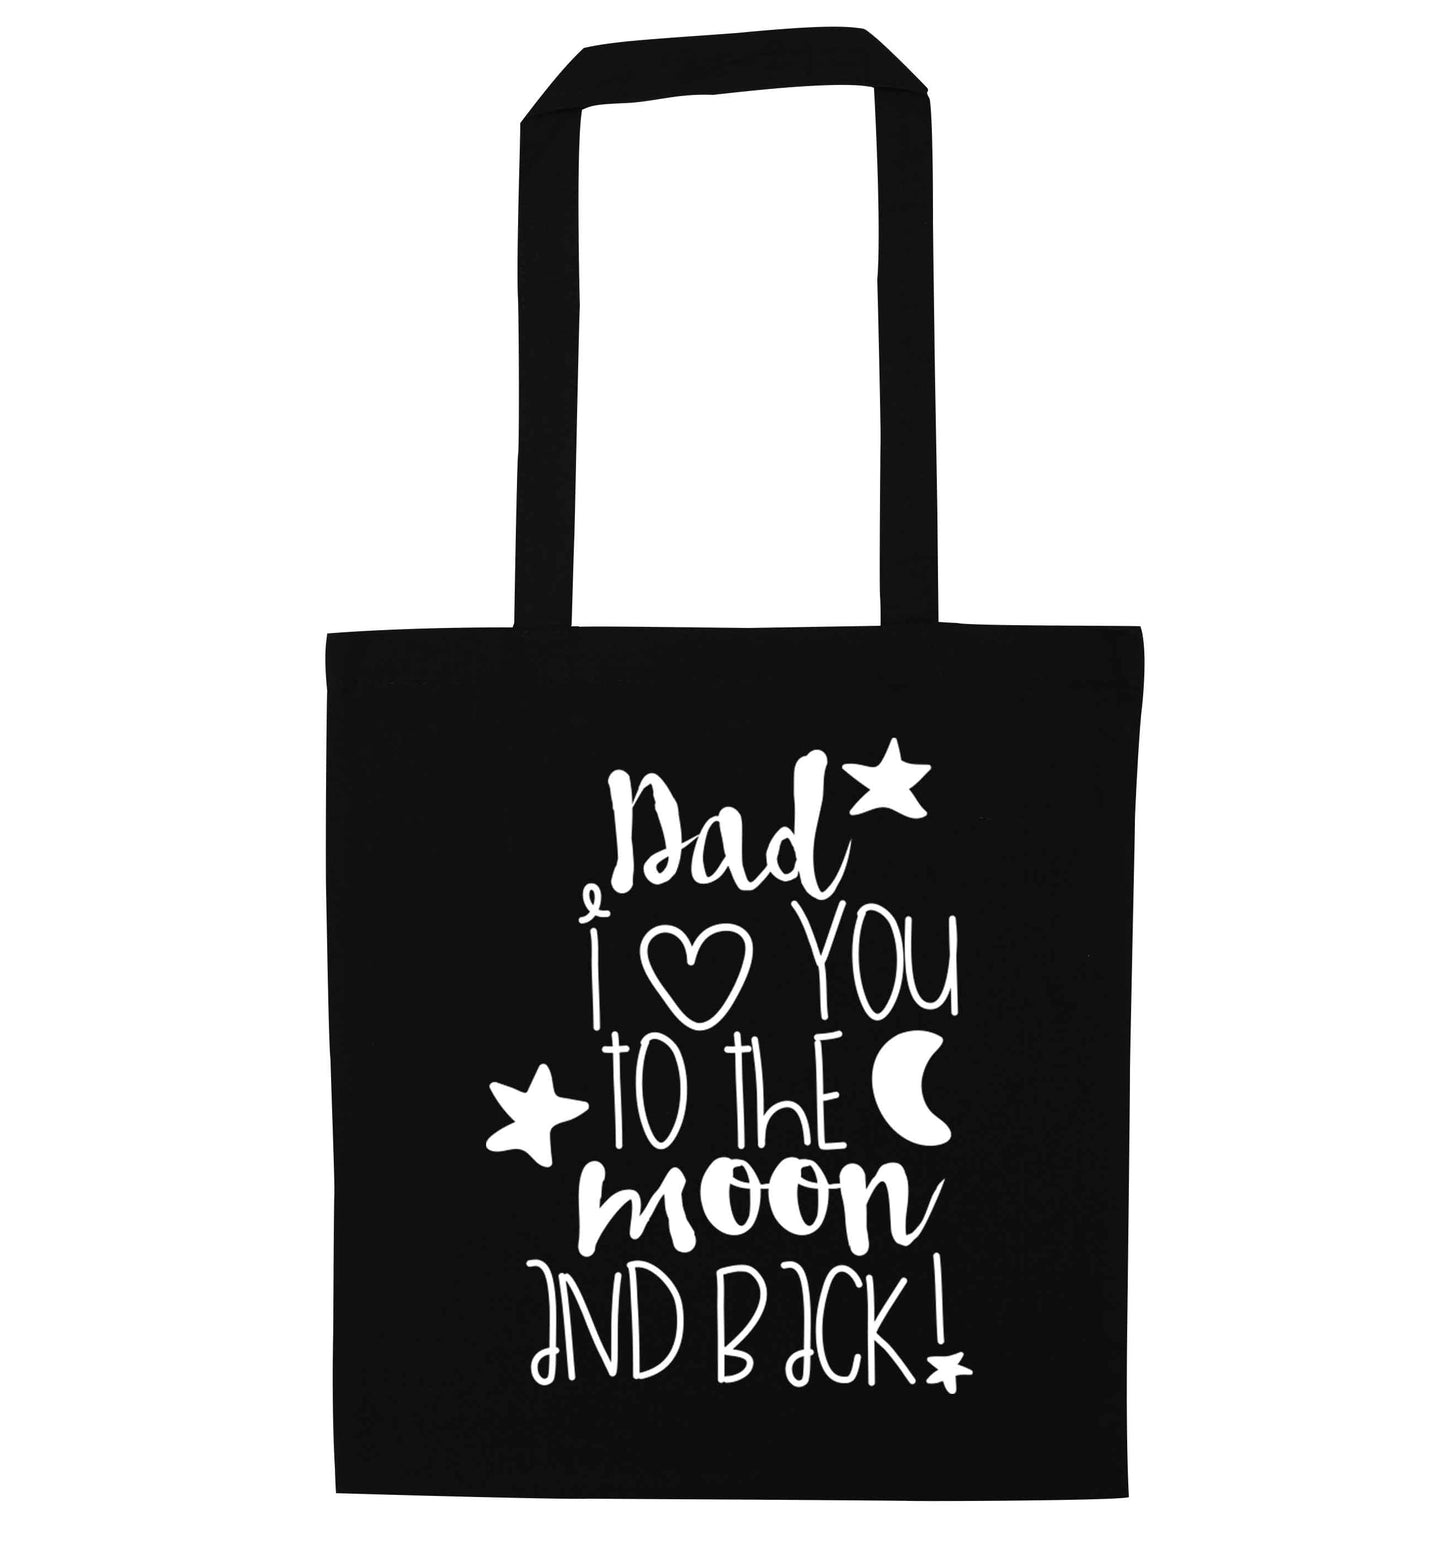 Dad I love you to the moon and back black tote bag